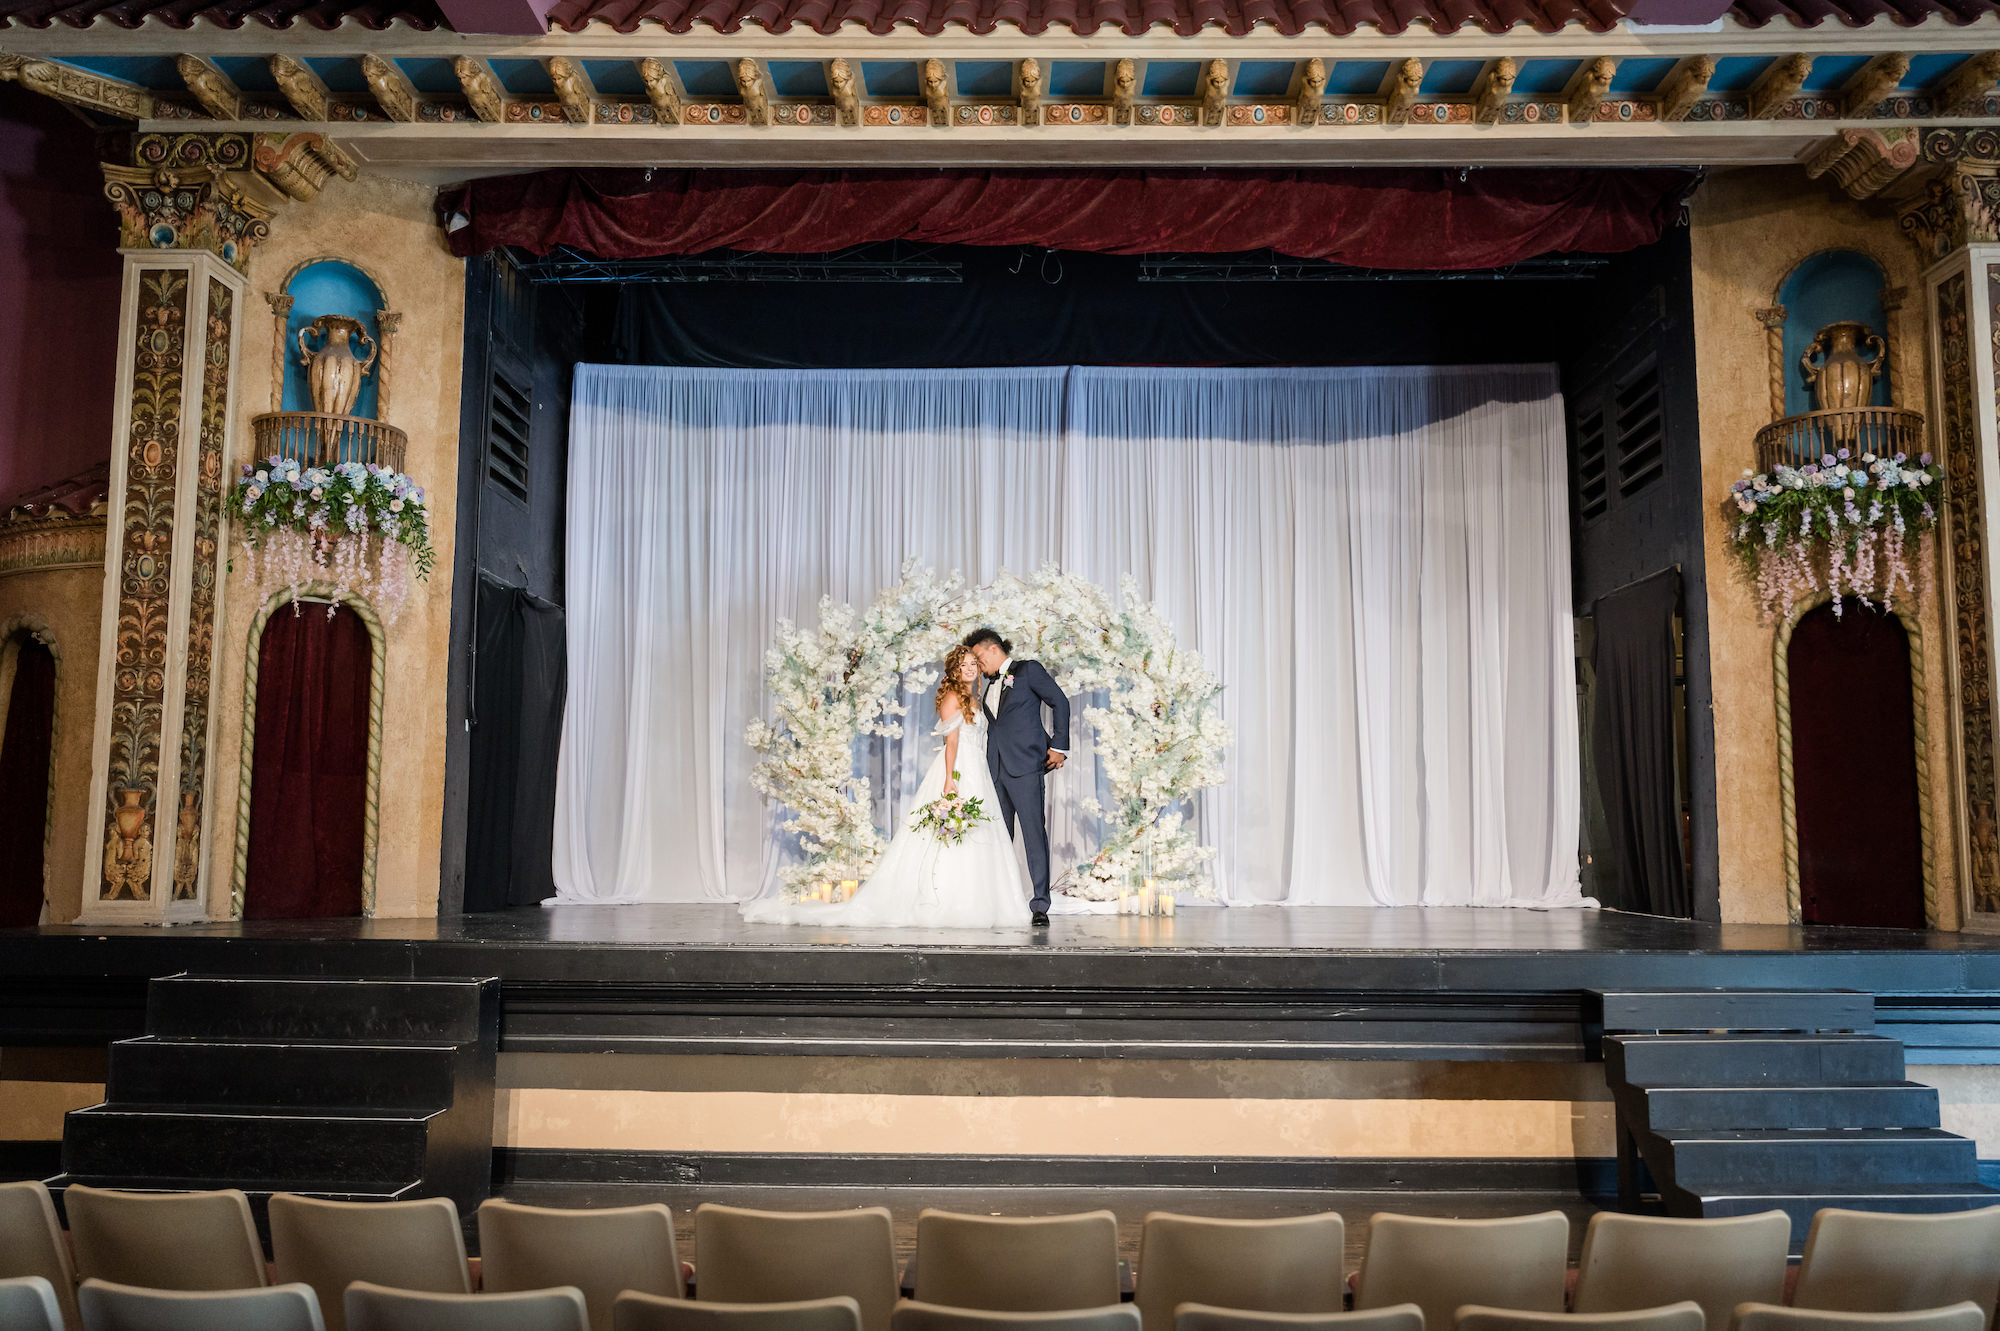 Stage Wedding Ceremony Inspiration | Round Flower Arch Ideas | Tampa Florist Save the Date Florida | Planner EventFull Weddings | Ybor City Venue The Cuban Club